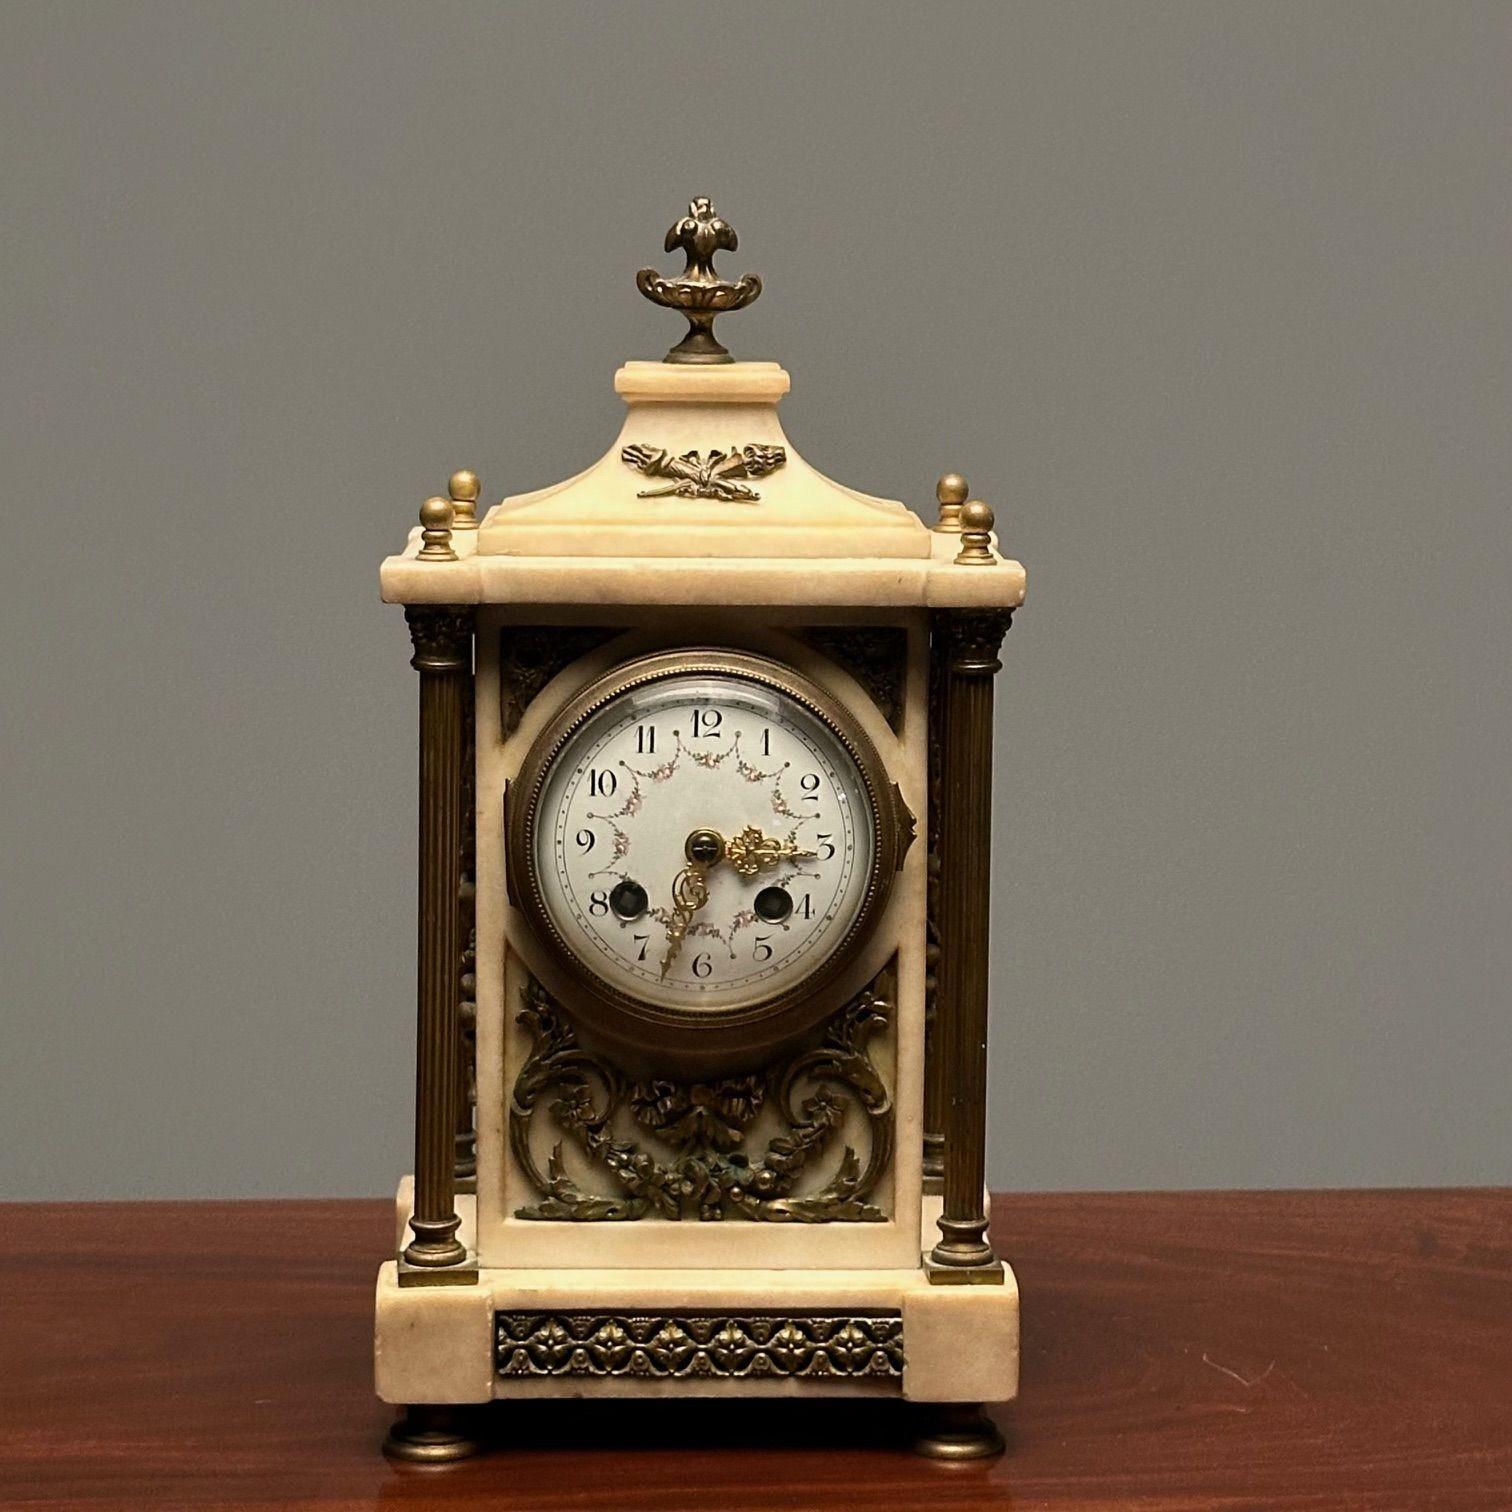 Marble and Bronze French Mantle, Bracket or Table Clock, France, Signed`

A charming casket shaped small clock having gilt bronze and marble form, working, artist signed and made in France stamped on the works. This clock is working.

13.25H x